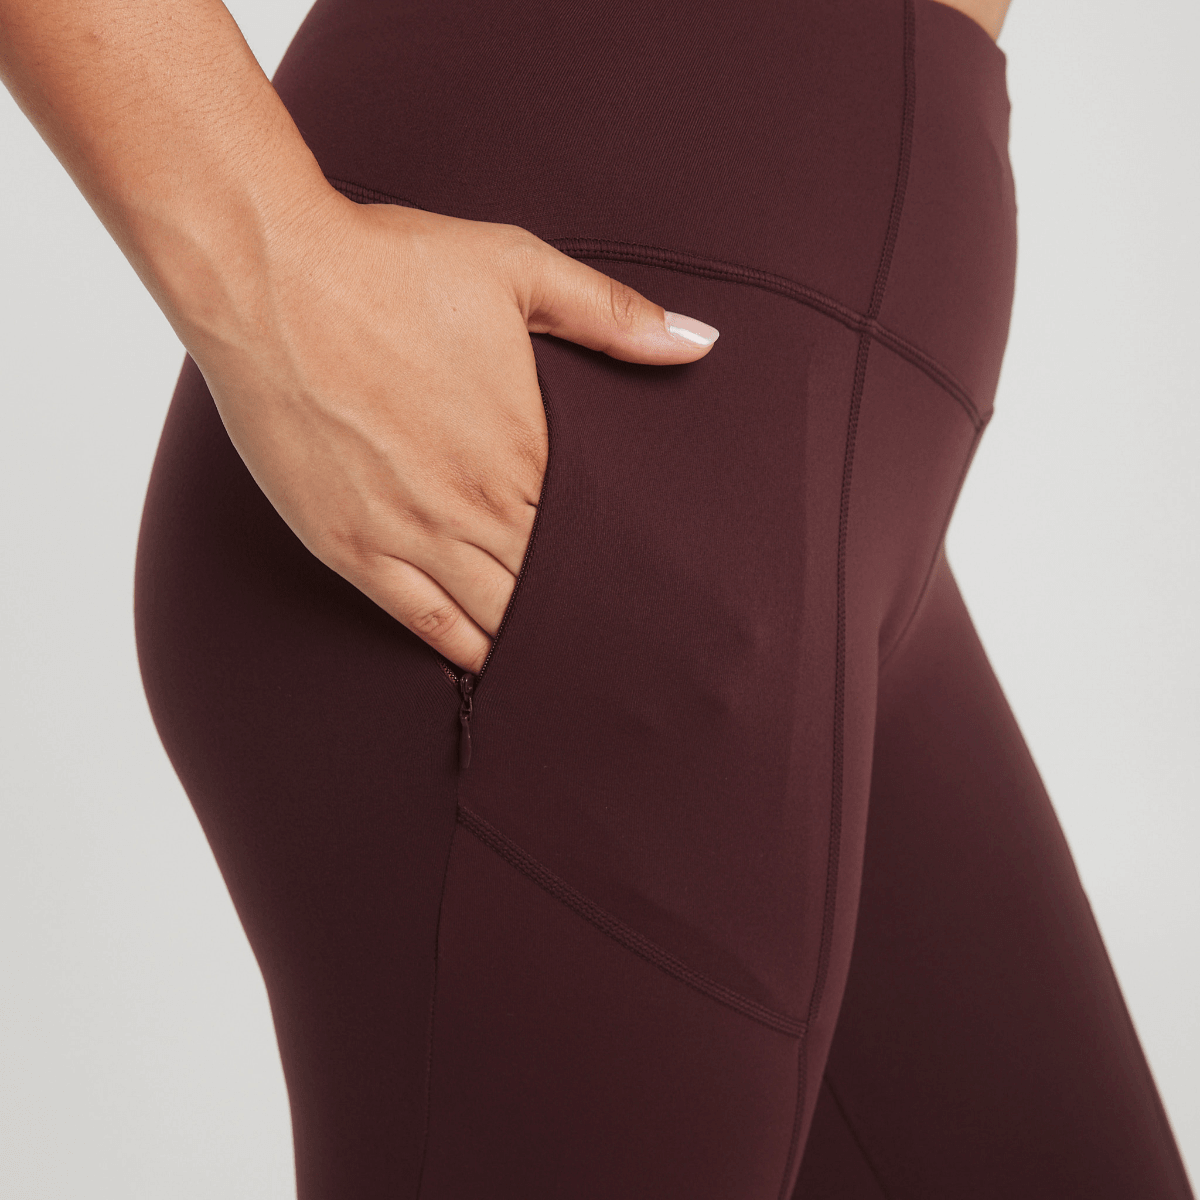 Victoria Stag Core 3/4 Length Leggings in Ox Blood pocket